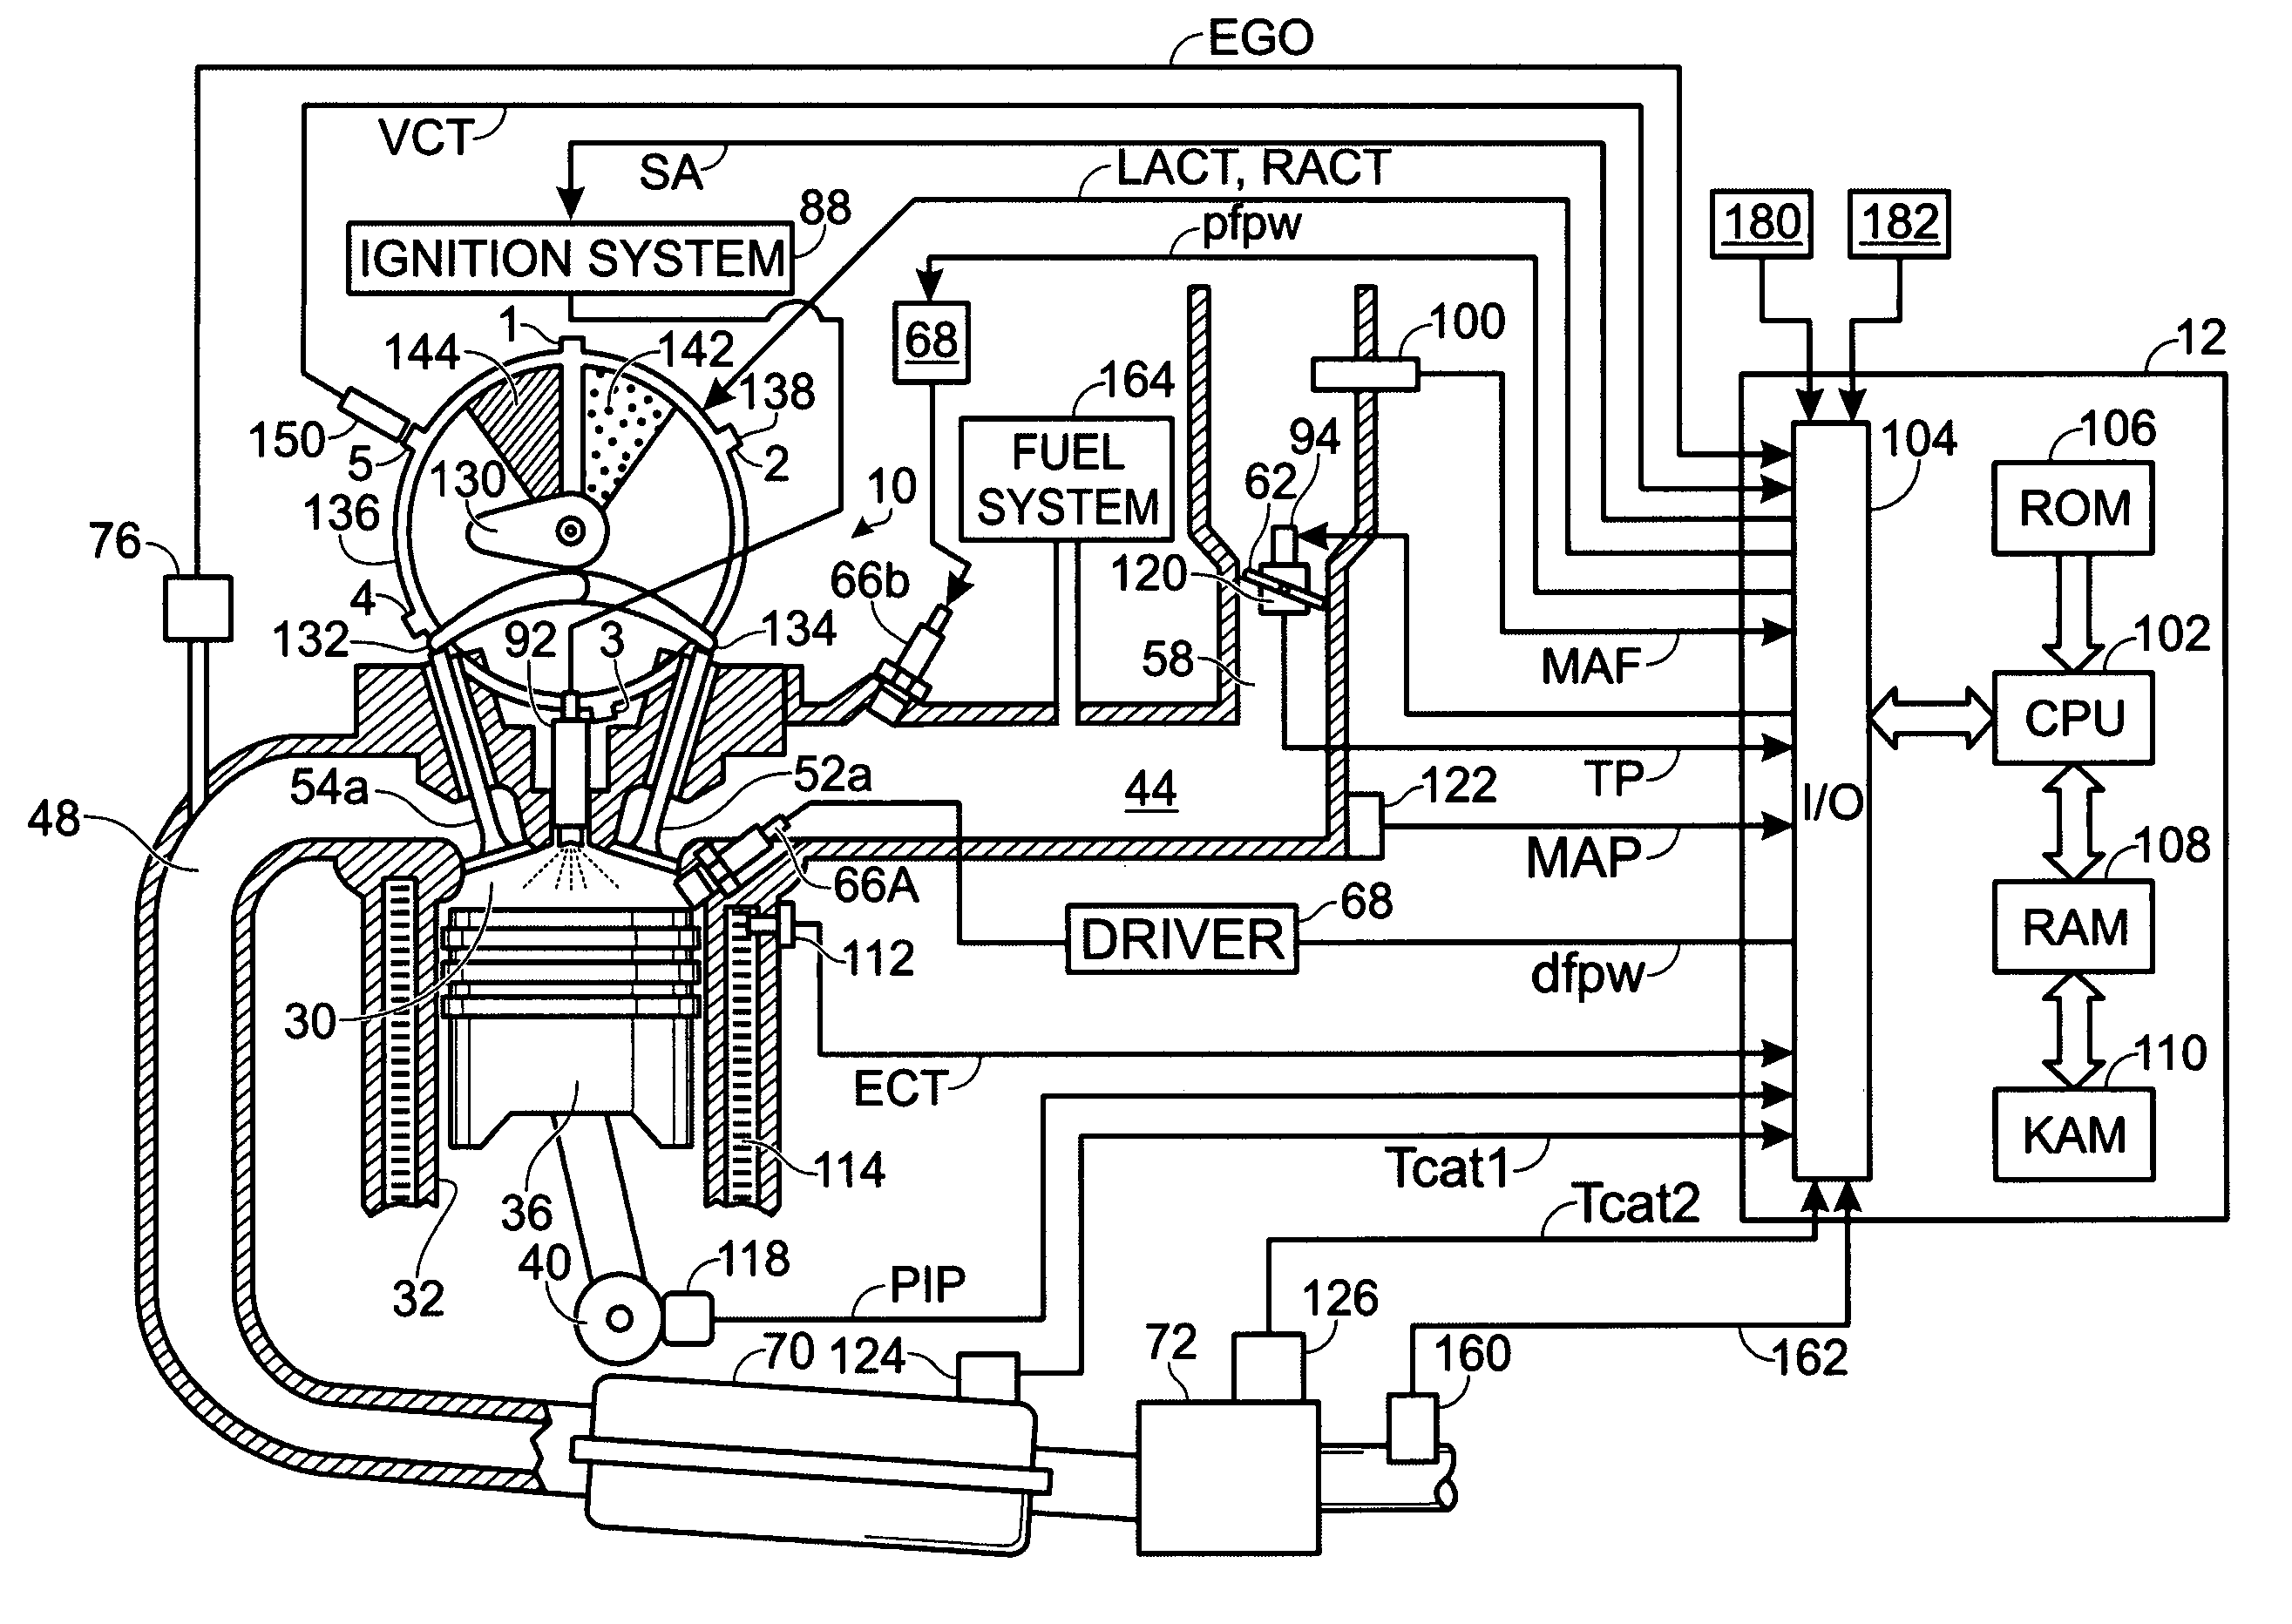 Engine with water and/or ethanol direct injection plus gas port fuel injectors